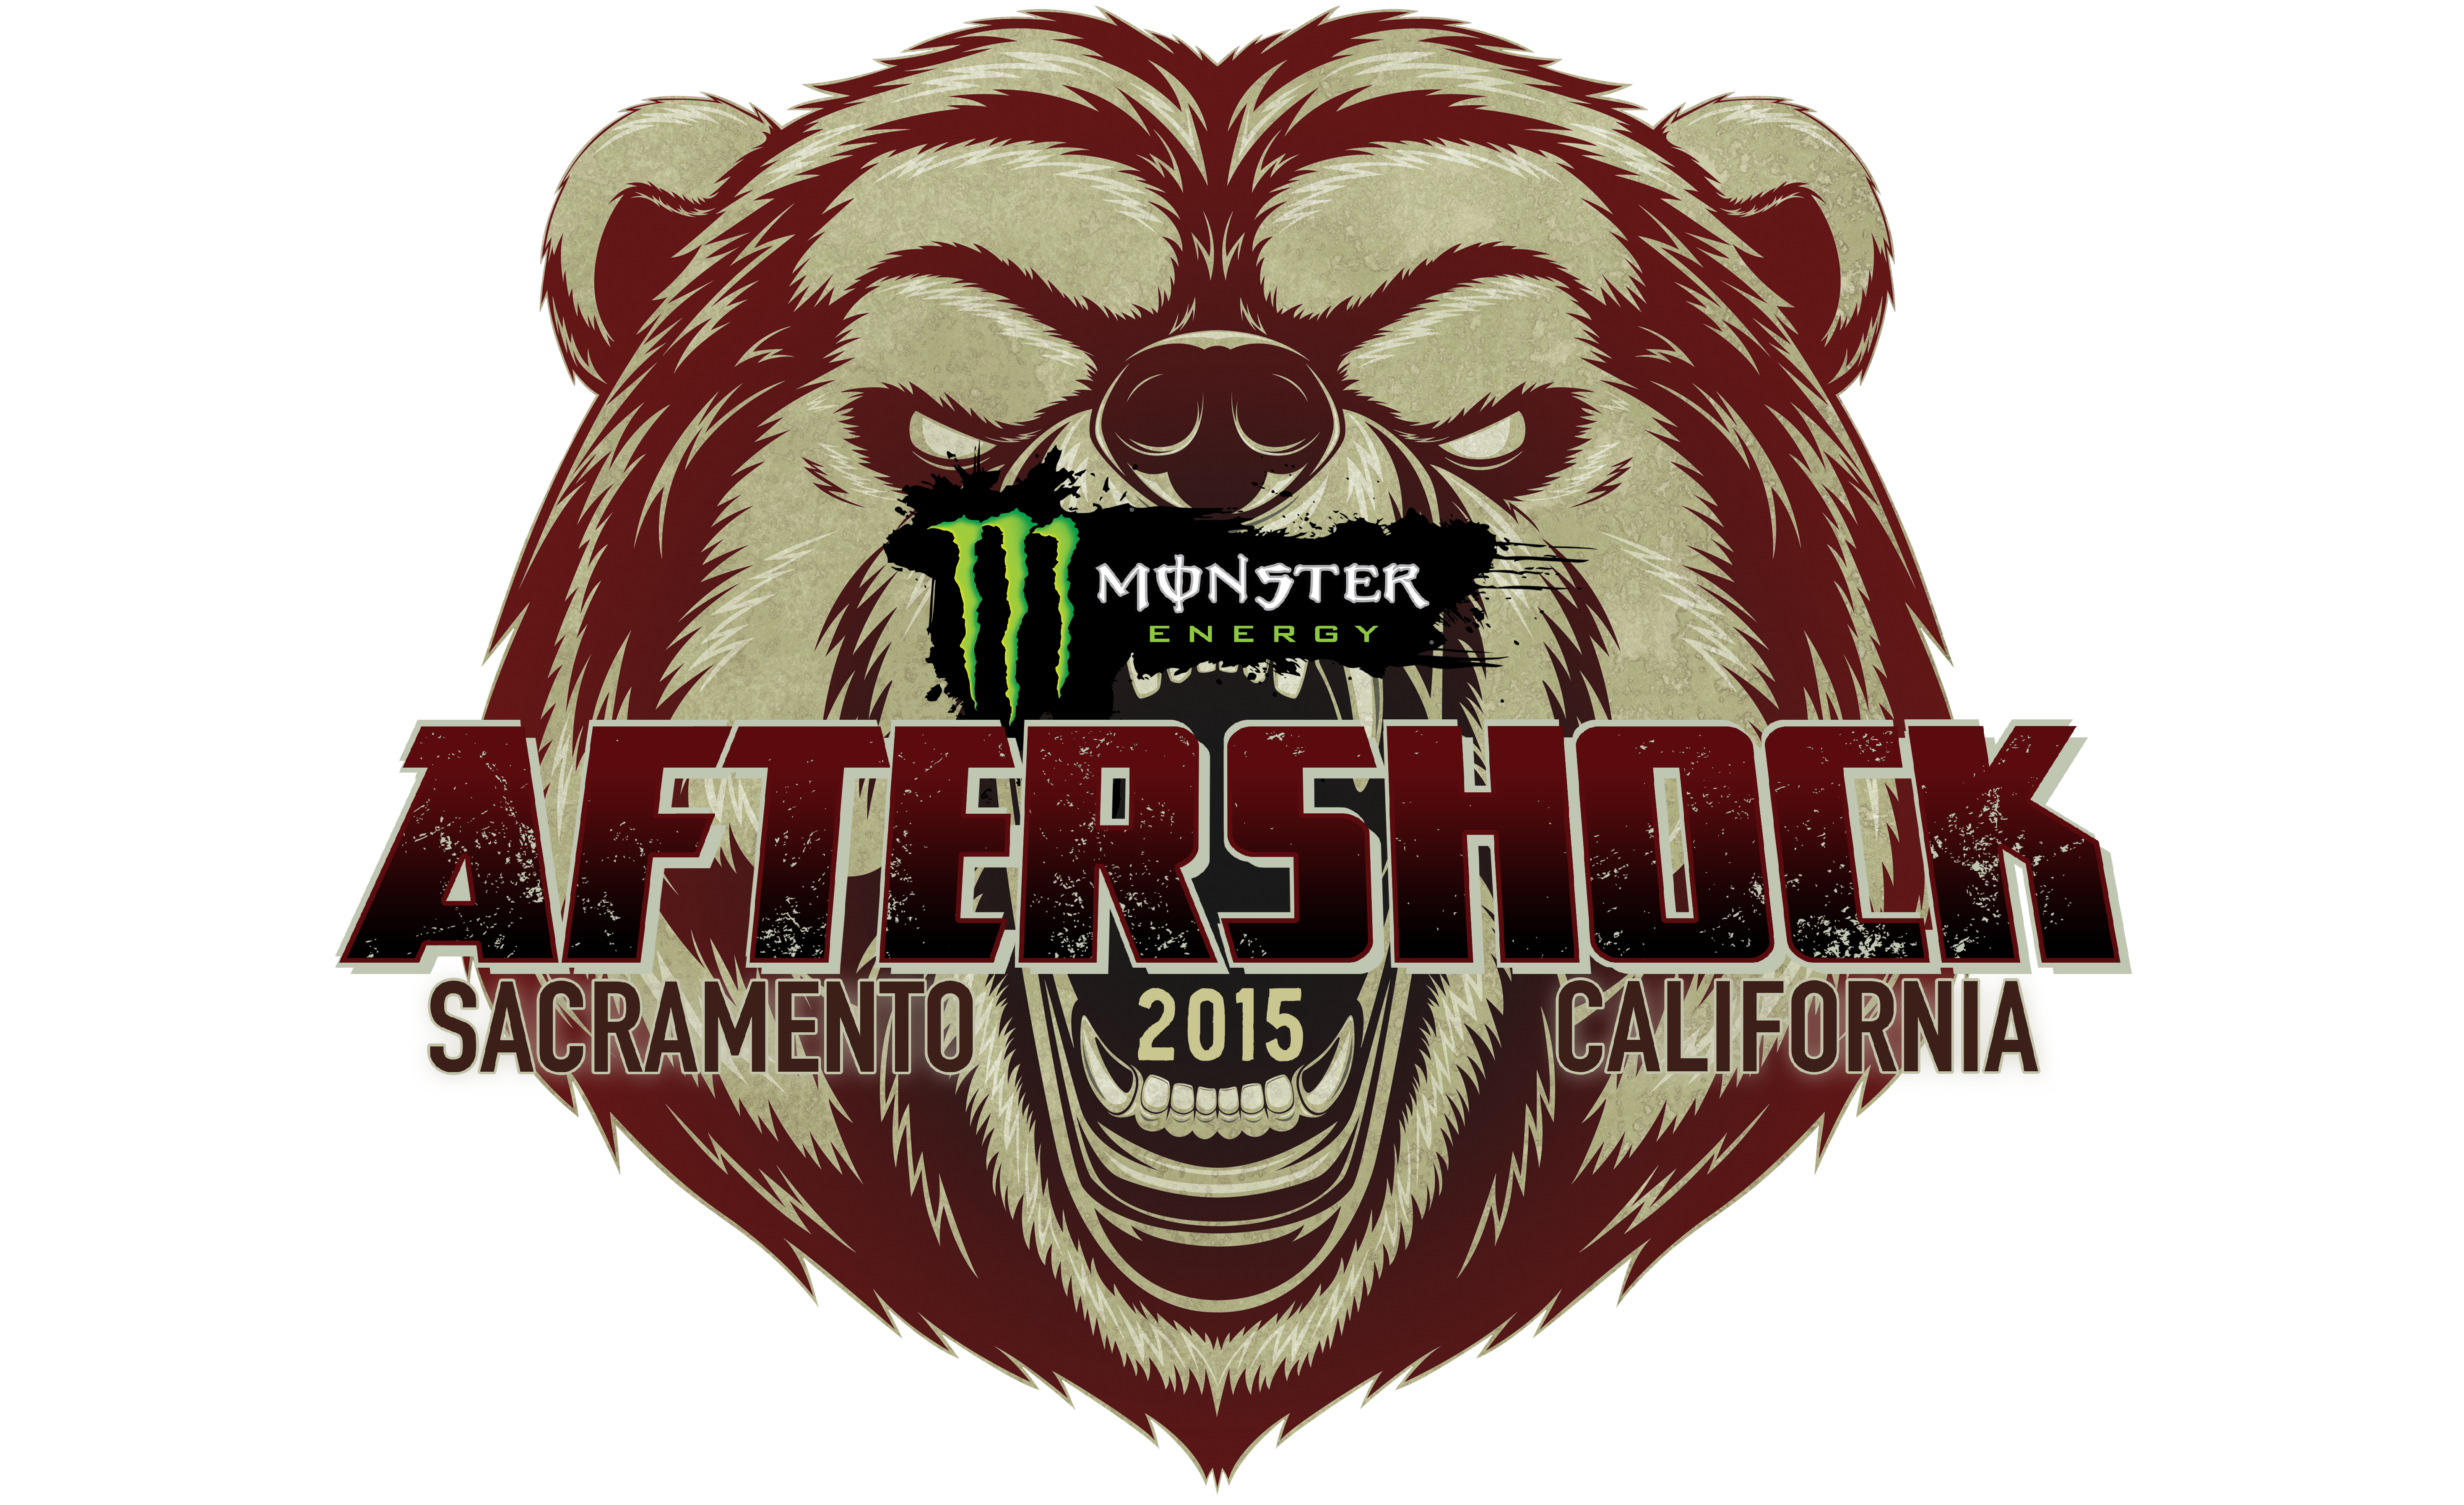 ADDITIONAL ENTERTAINMENT ANNOUNCED FOR MONSTER ENERGY AFTERSHOCK FESTIVAL OCTOBER 24 & 25 AT GIBSON RANCH NEAR SACRAMENTO, CA